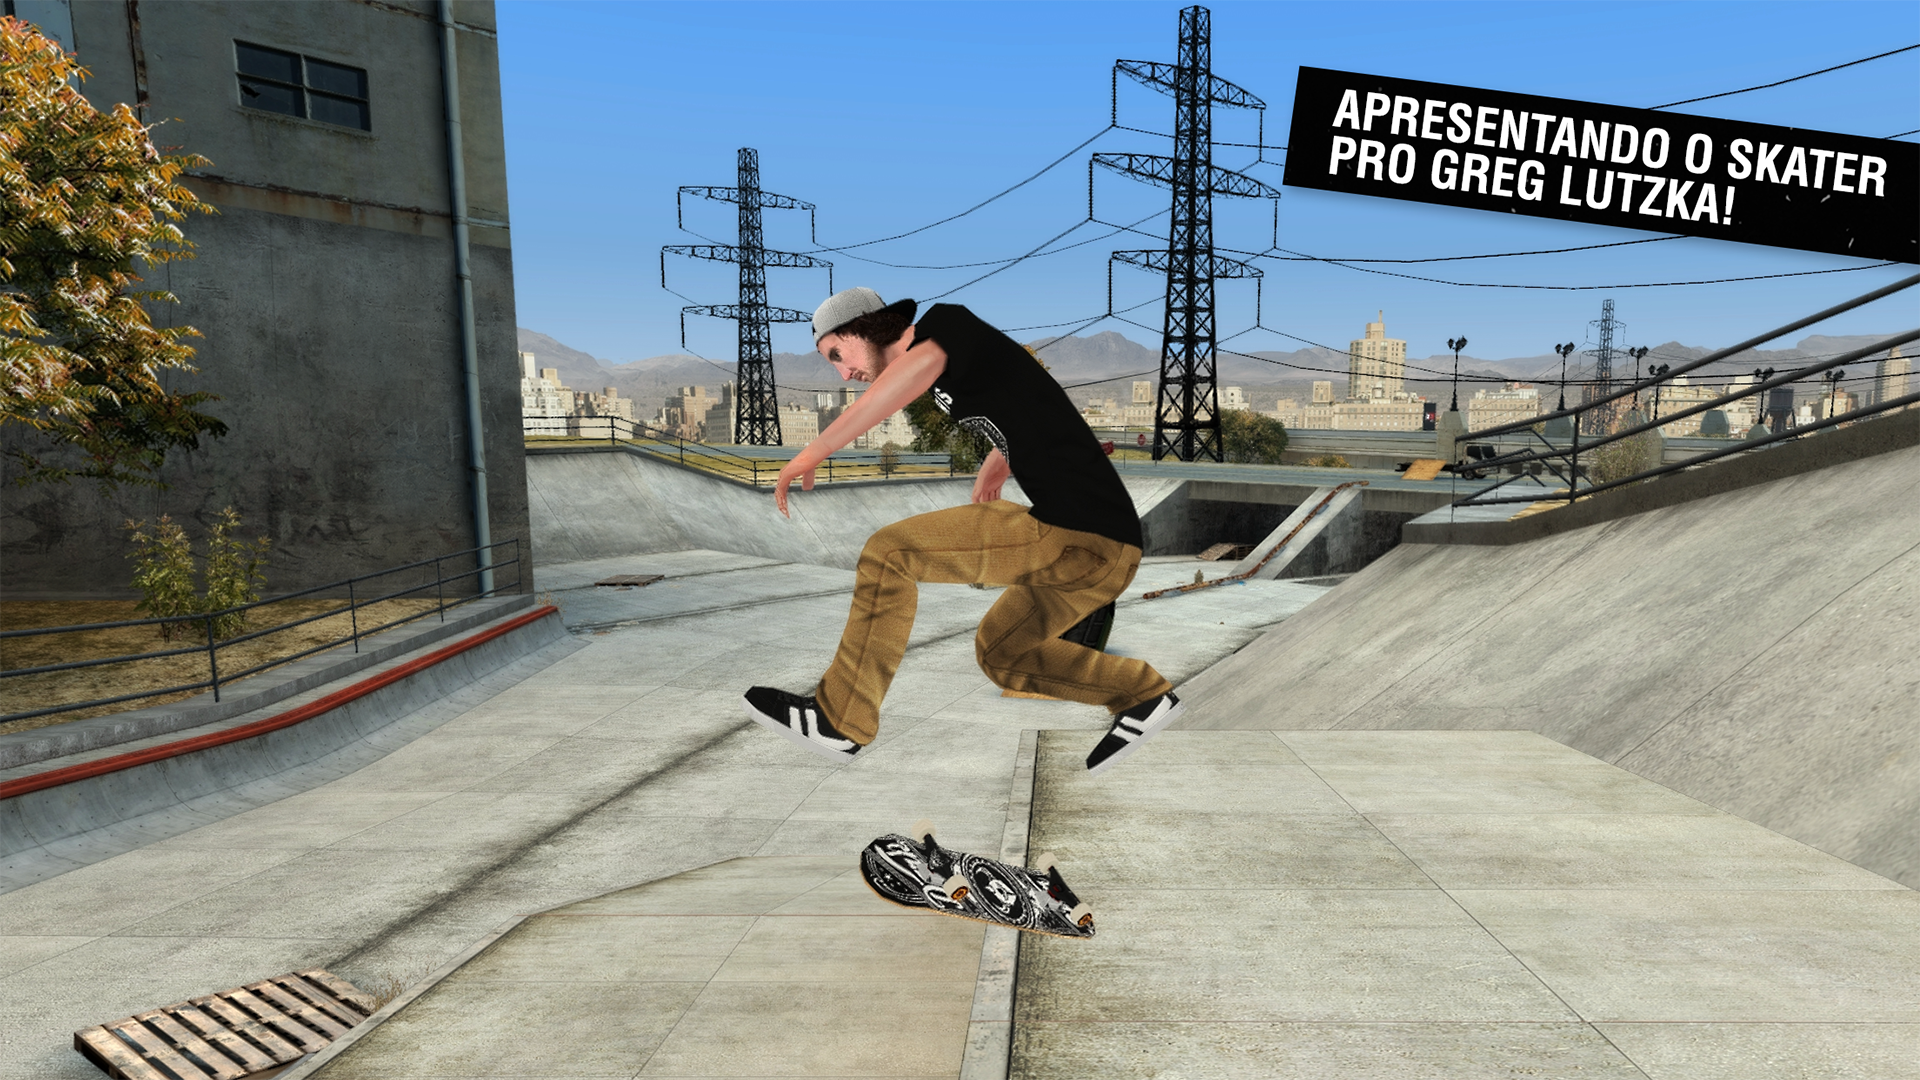 Baixe Skateboard Party 3 1.10.0.RC-GP-Lite(62) para Android